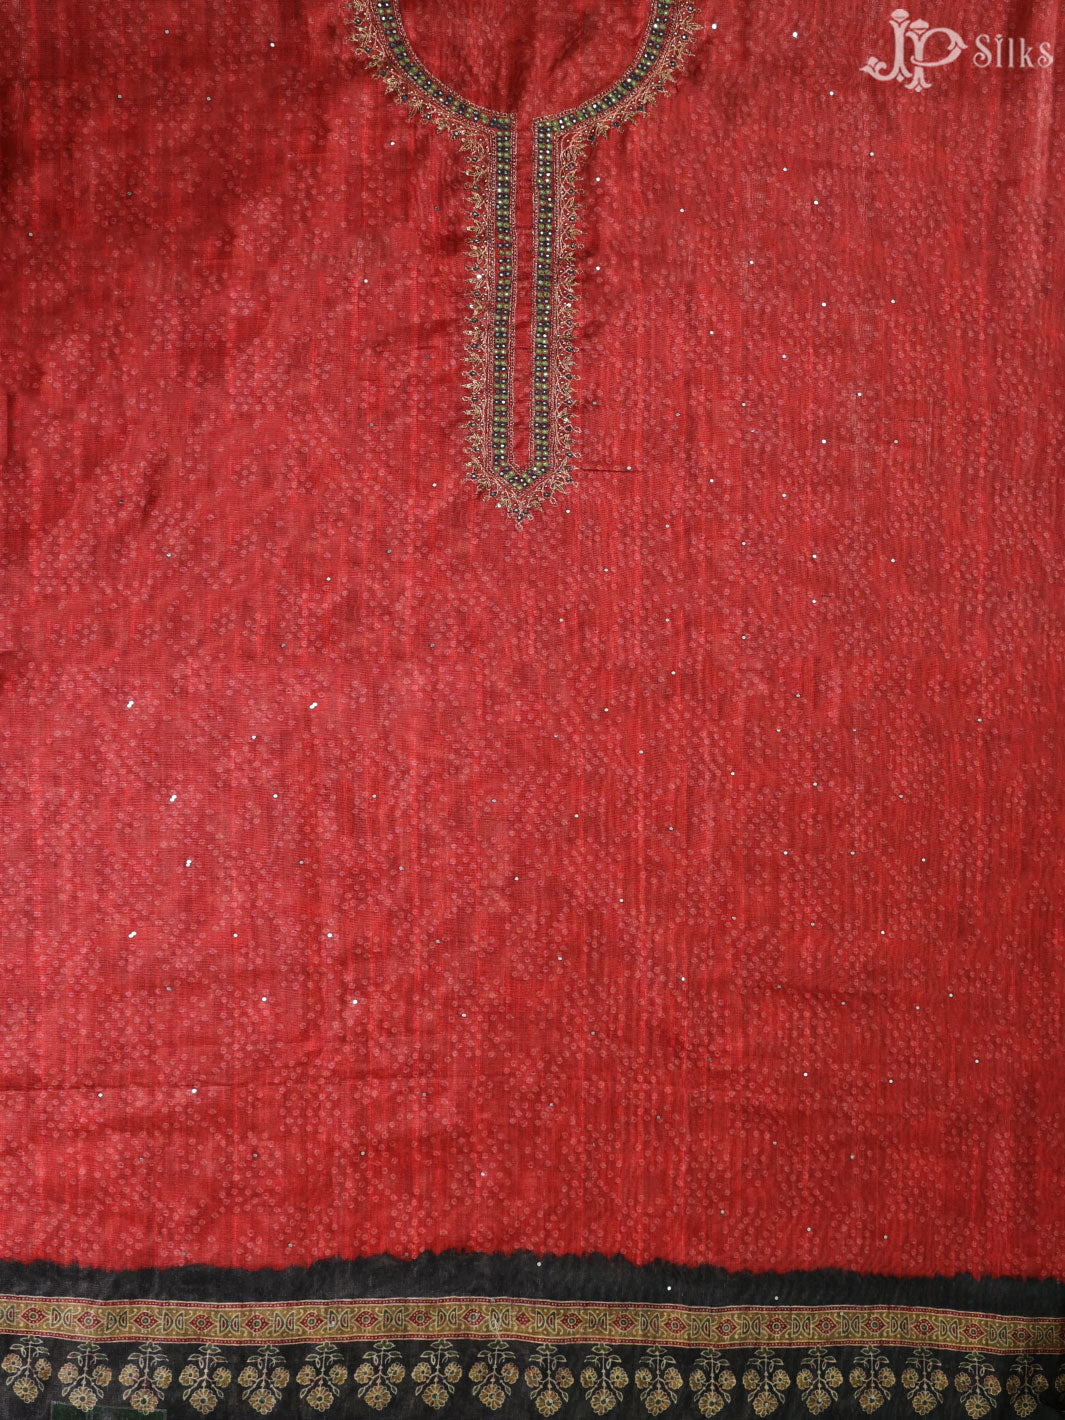 Red and Black Tussar Unstiched Chudidhar Material - E1449 - View 6